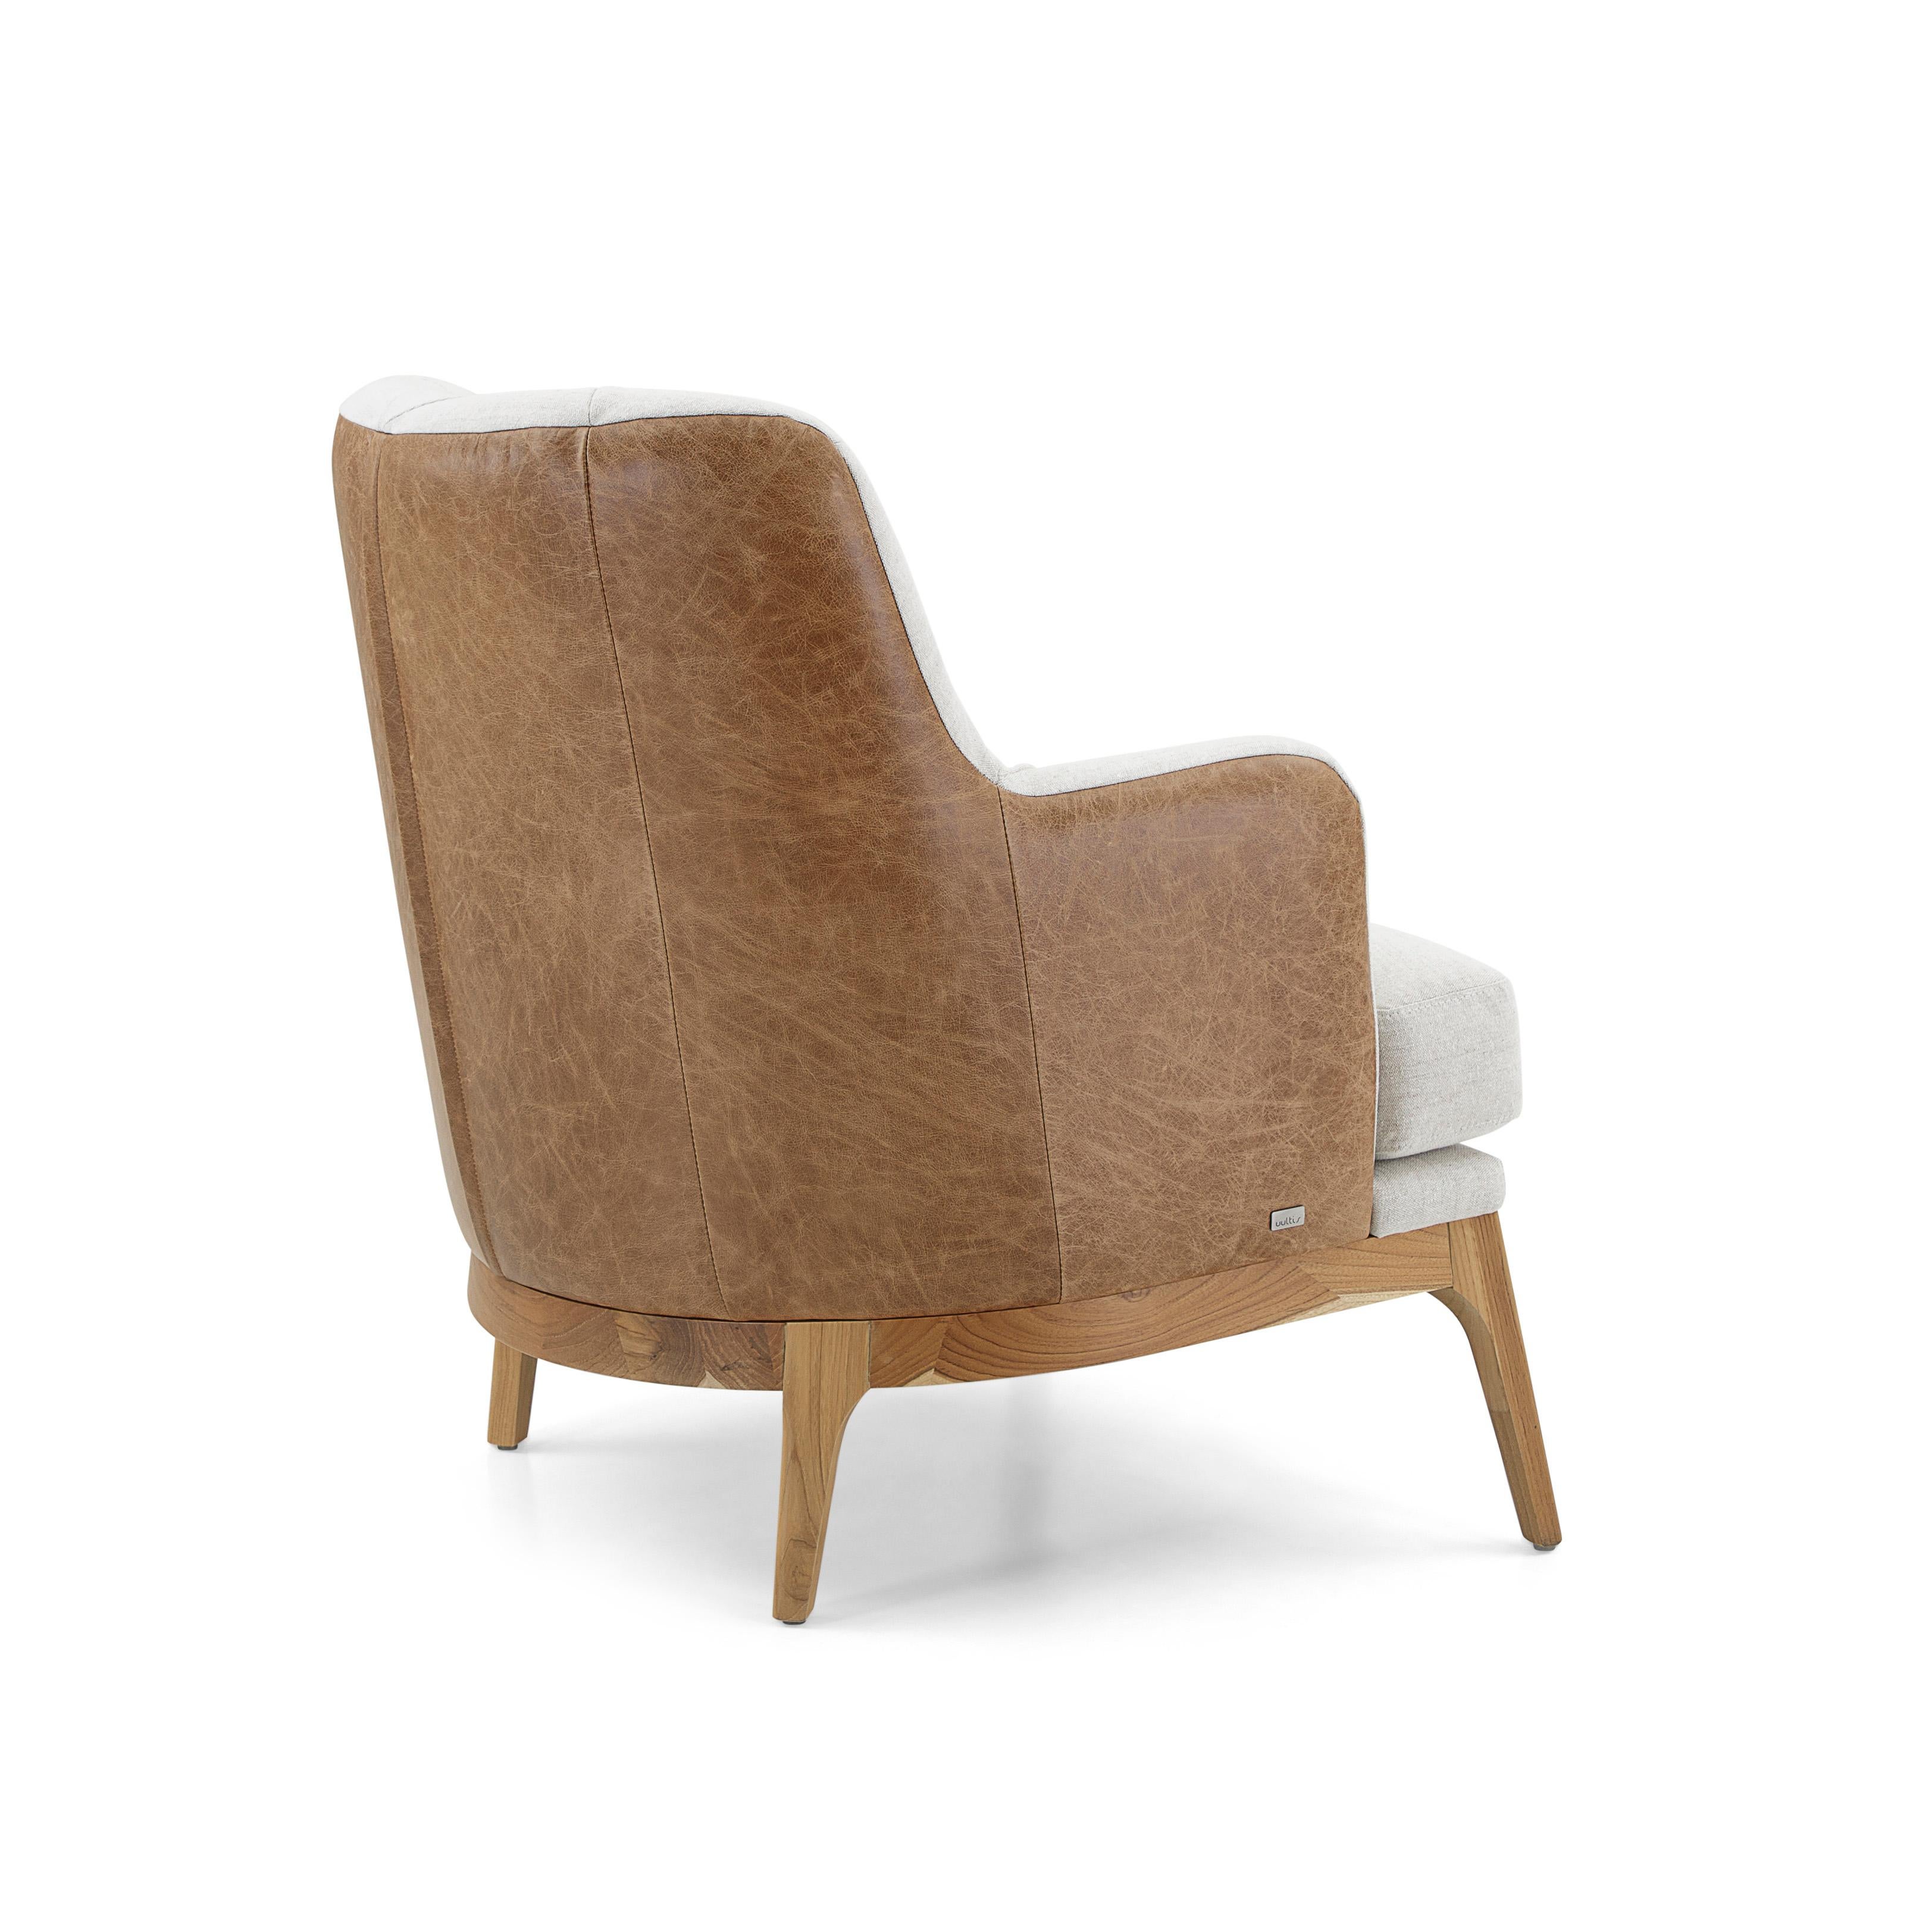 Athos Armchair Upholstered in Leather and Fabric in Teak Wood Finish For Sale 1